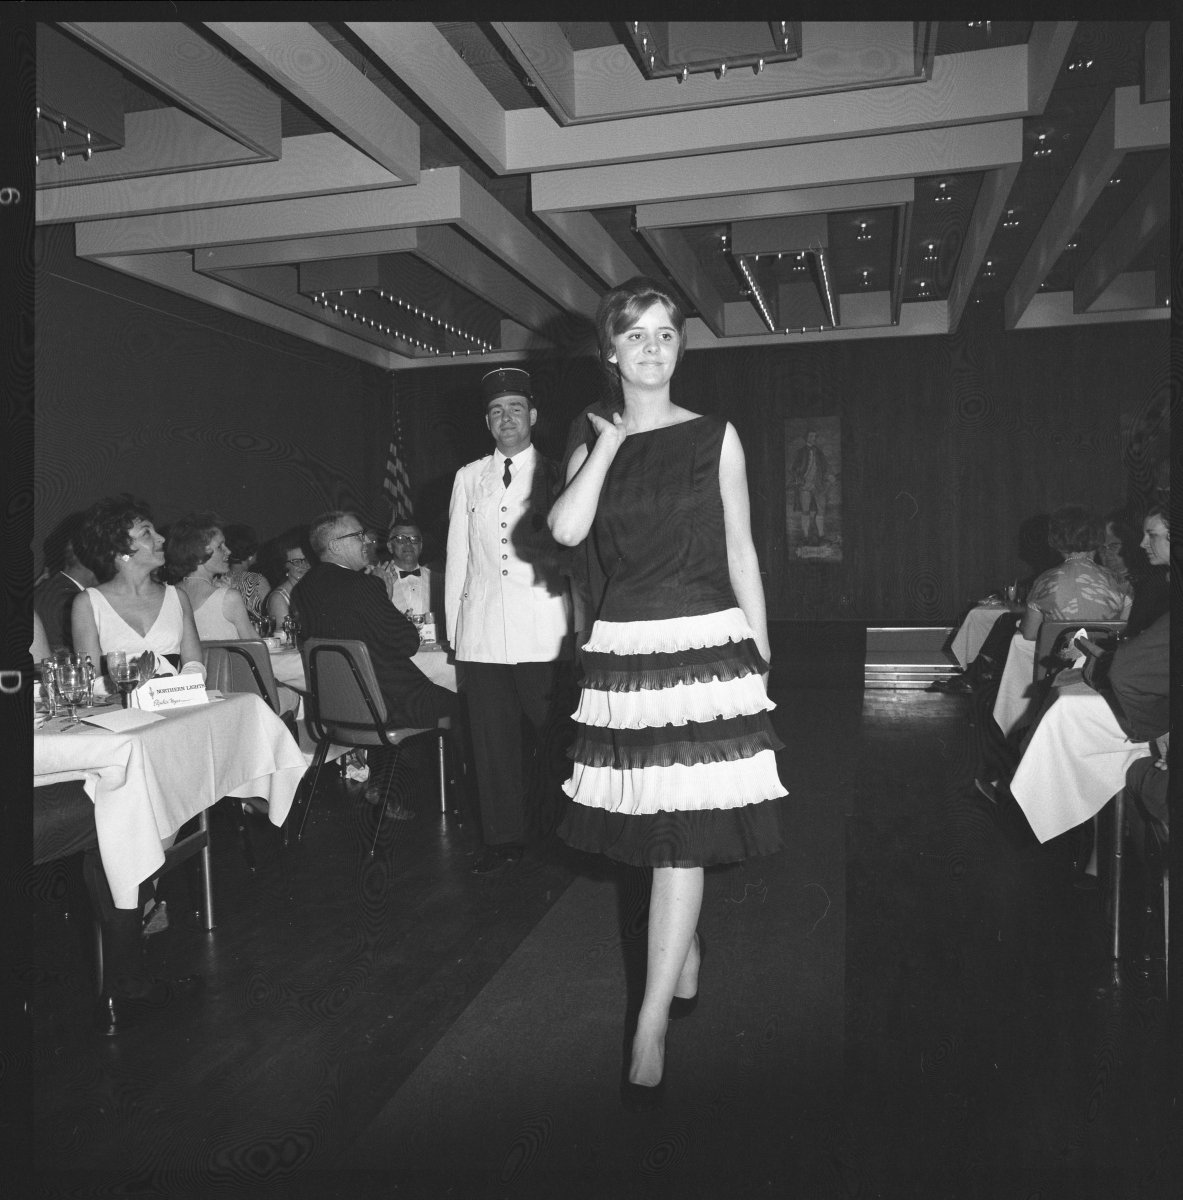 July 20, 1965 fashion show in the Discovery Room of the Hotel Captain Cook in Anchorage, featuring the work of Anchorage designer Betty Crouch. Via Anchorage Museum. #alaskahistory #alaska #anchoragehistory